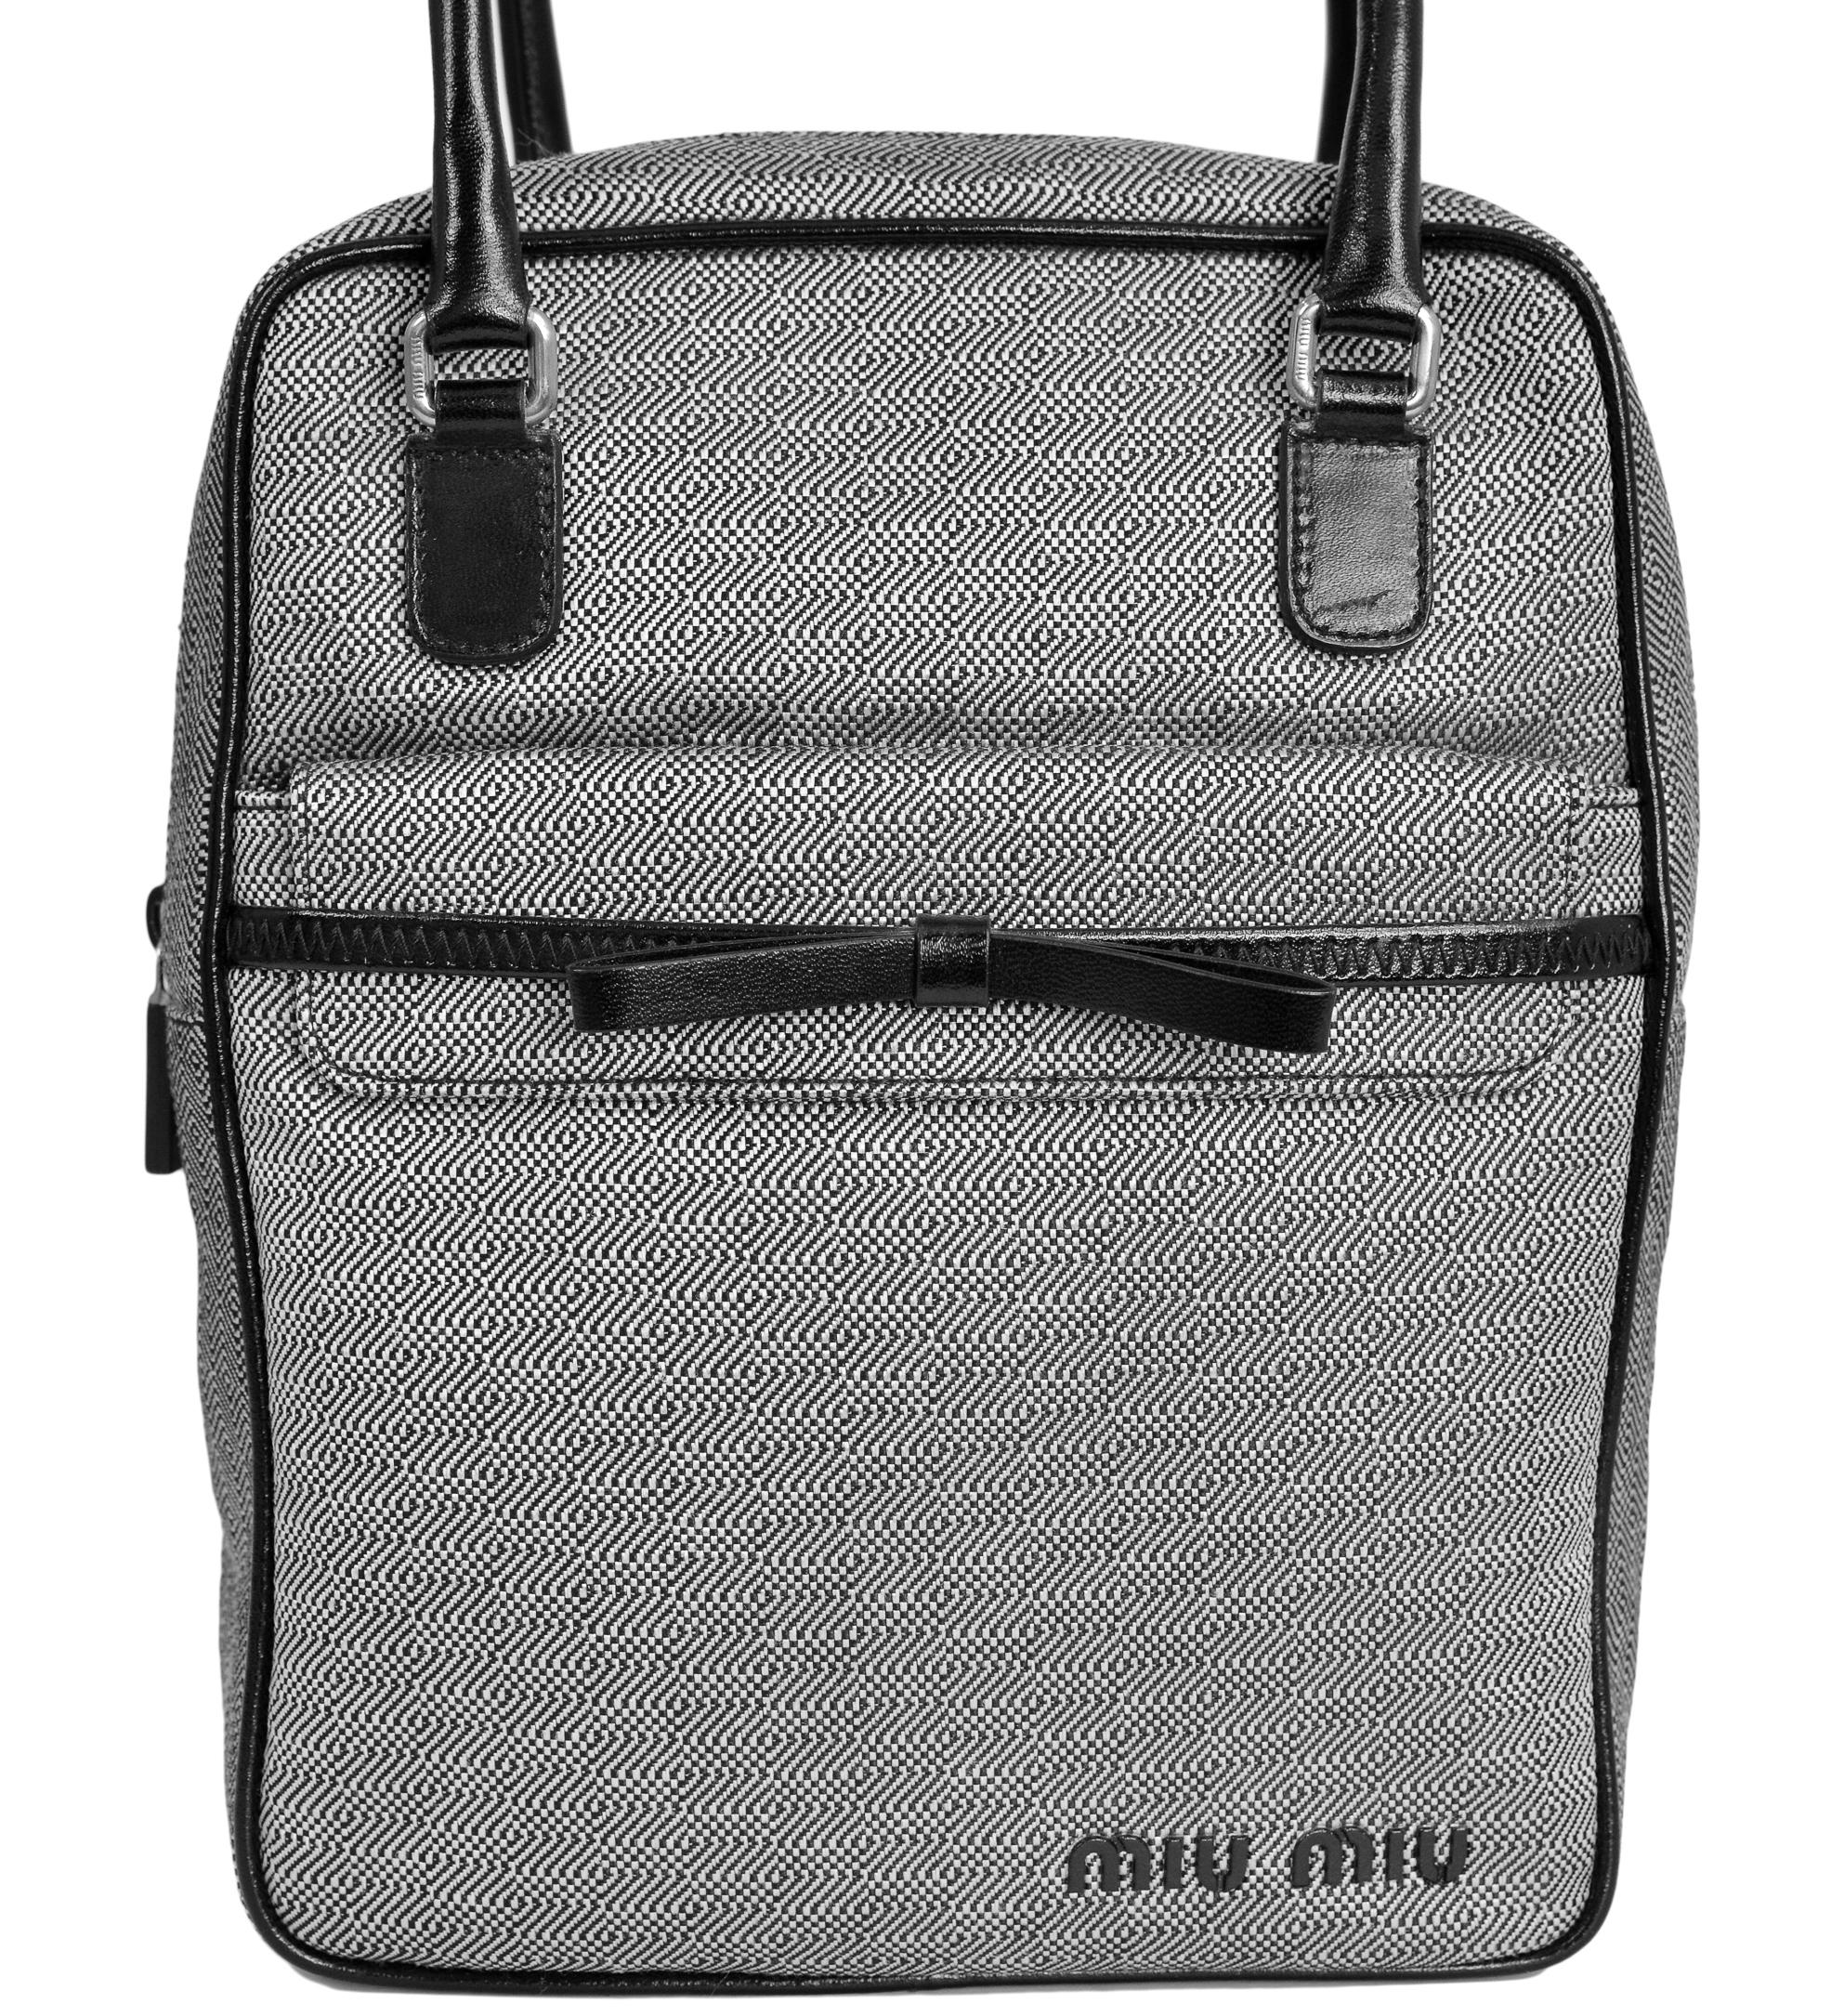 Resurrection Vintage is excited to offer a vintage Miu Miu black and white bowling bag style handbag that features a geometric print, black leather trim and bow, front pocket with flap, and chrome hardware. 

Miu Miu
Size Medium
Woven Fabric,